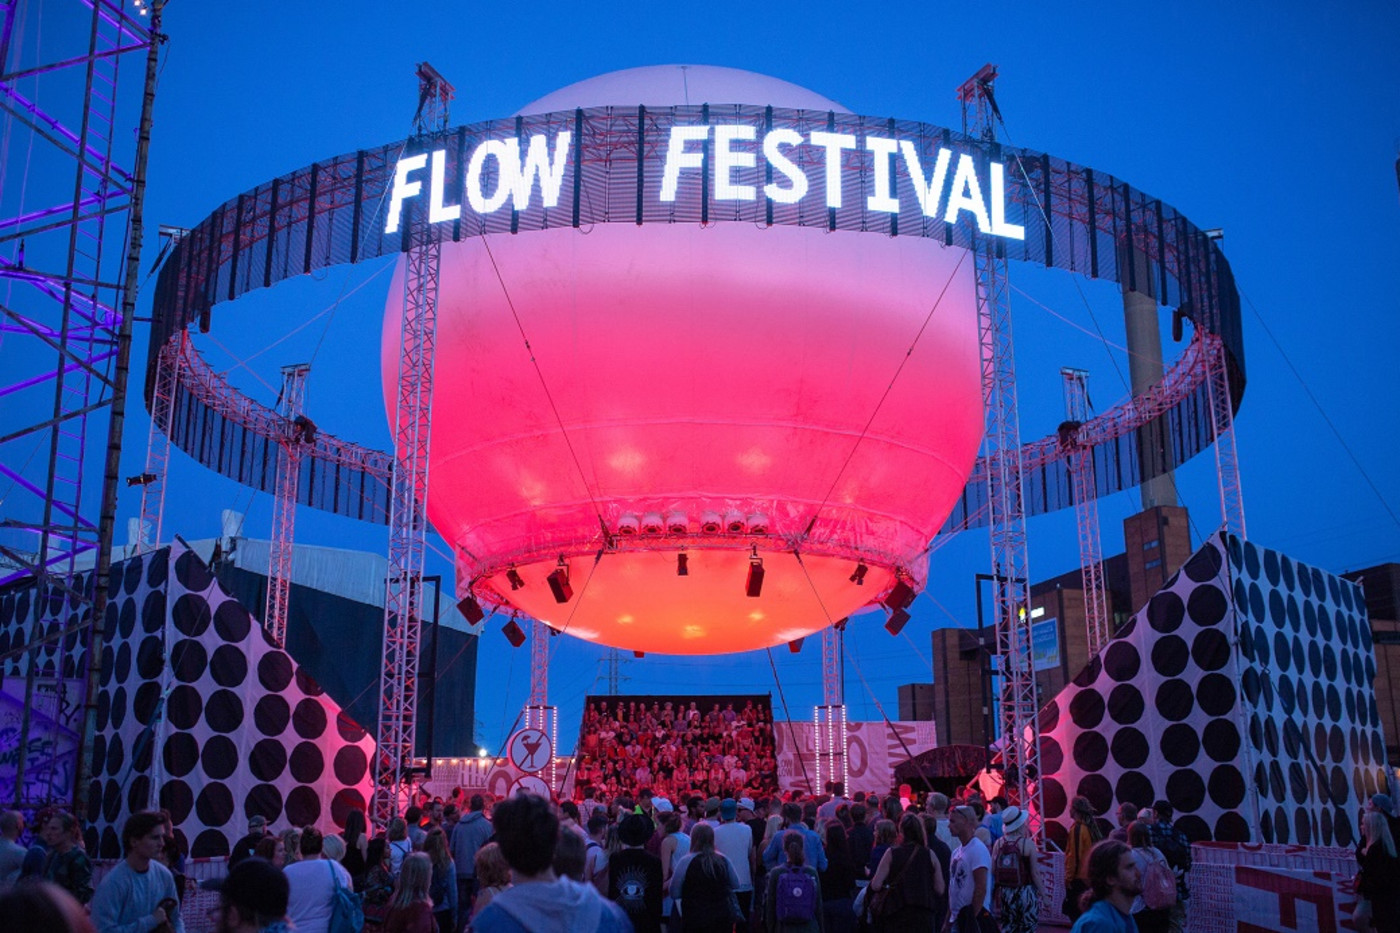 Helsinki’s Flow Festival Was The Undisputed Champ Of This Year’s Season